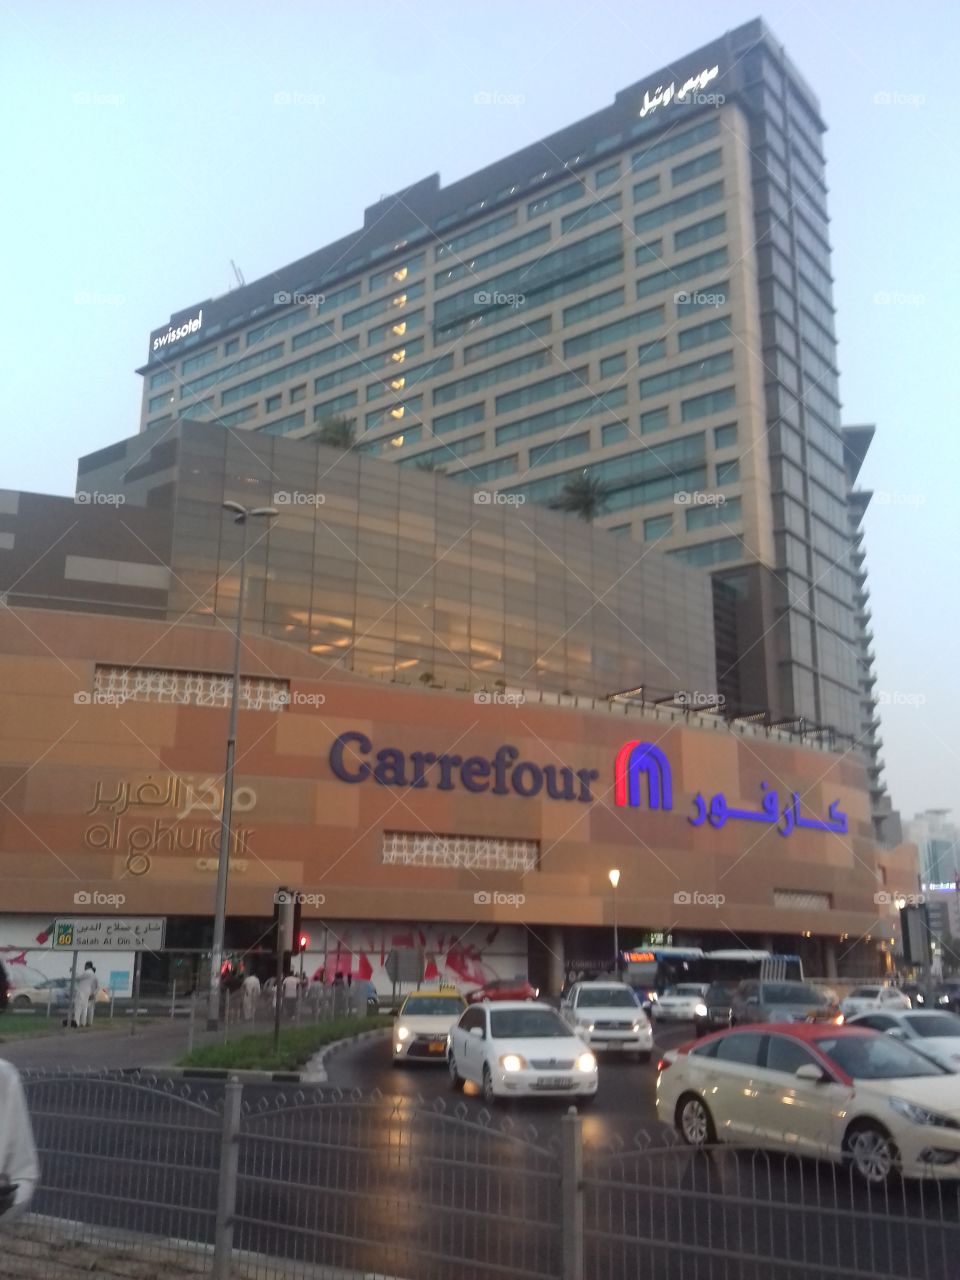 carrefour shopping mall